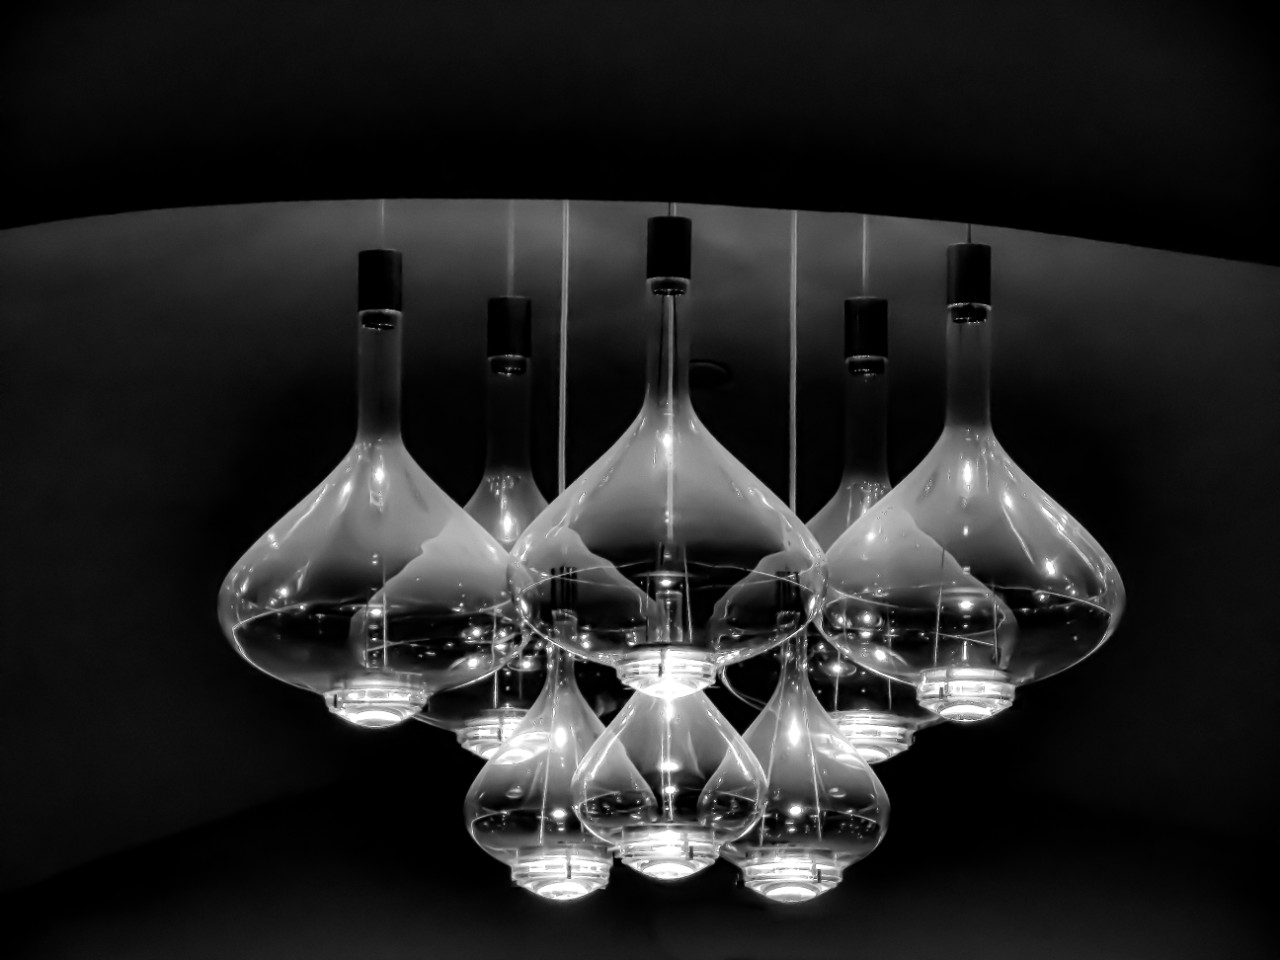 a dramatic black and white close-up photo of a cluster of chandelier teardrop lights